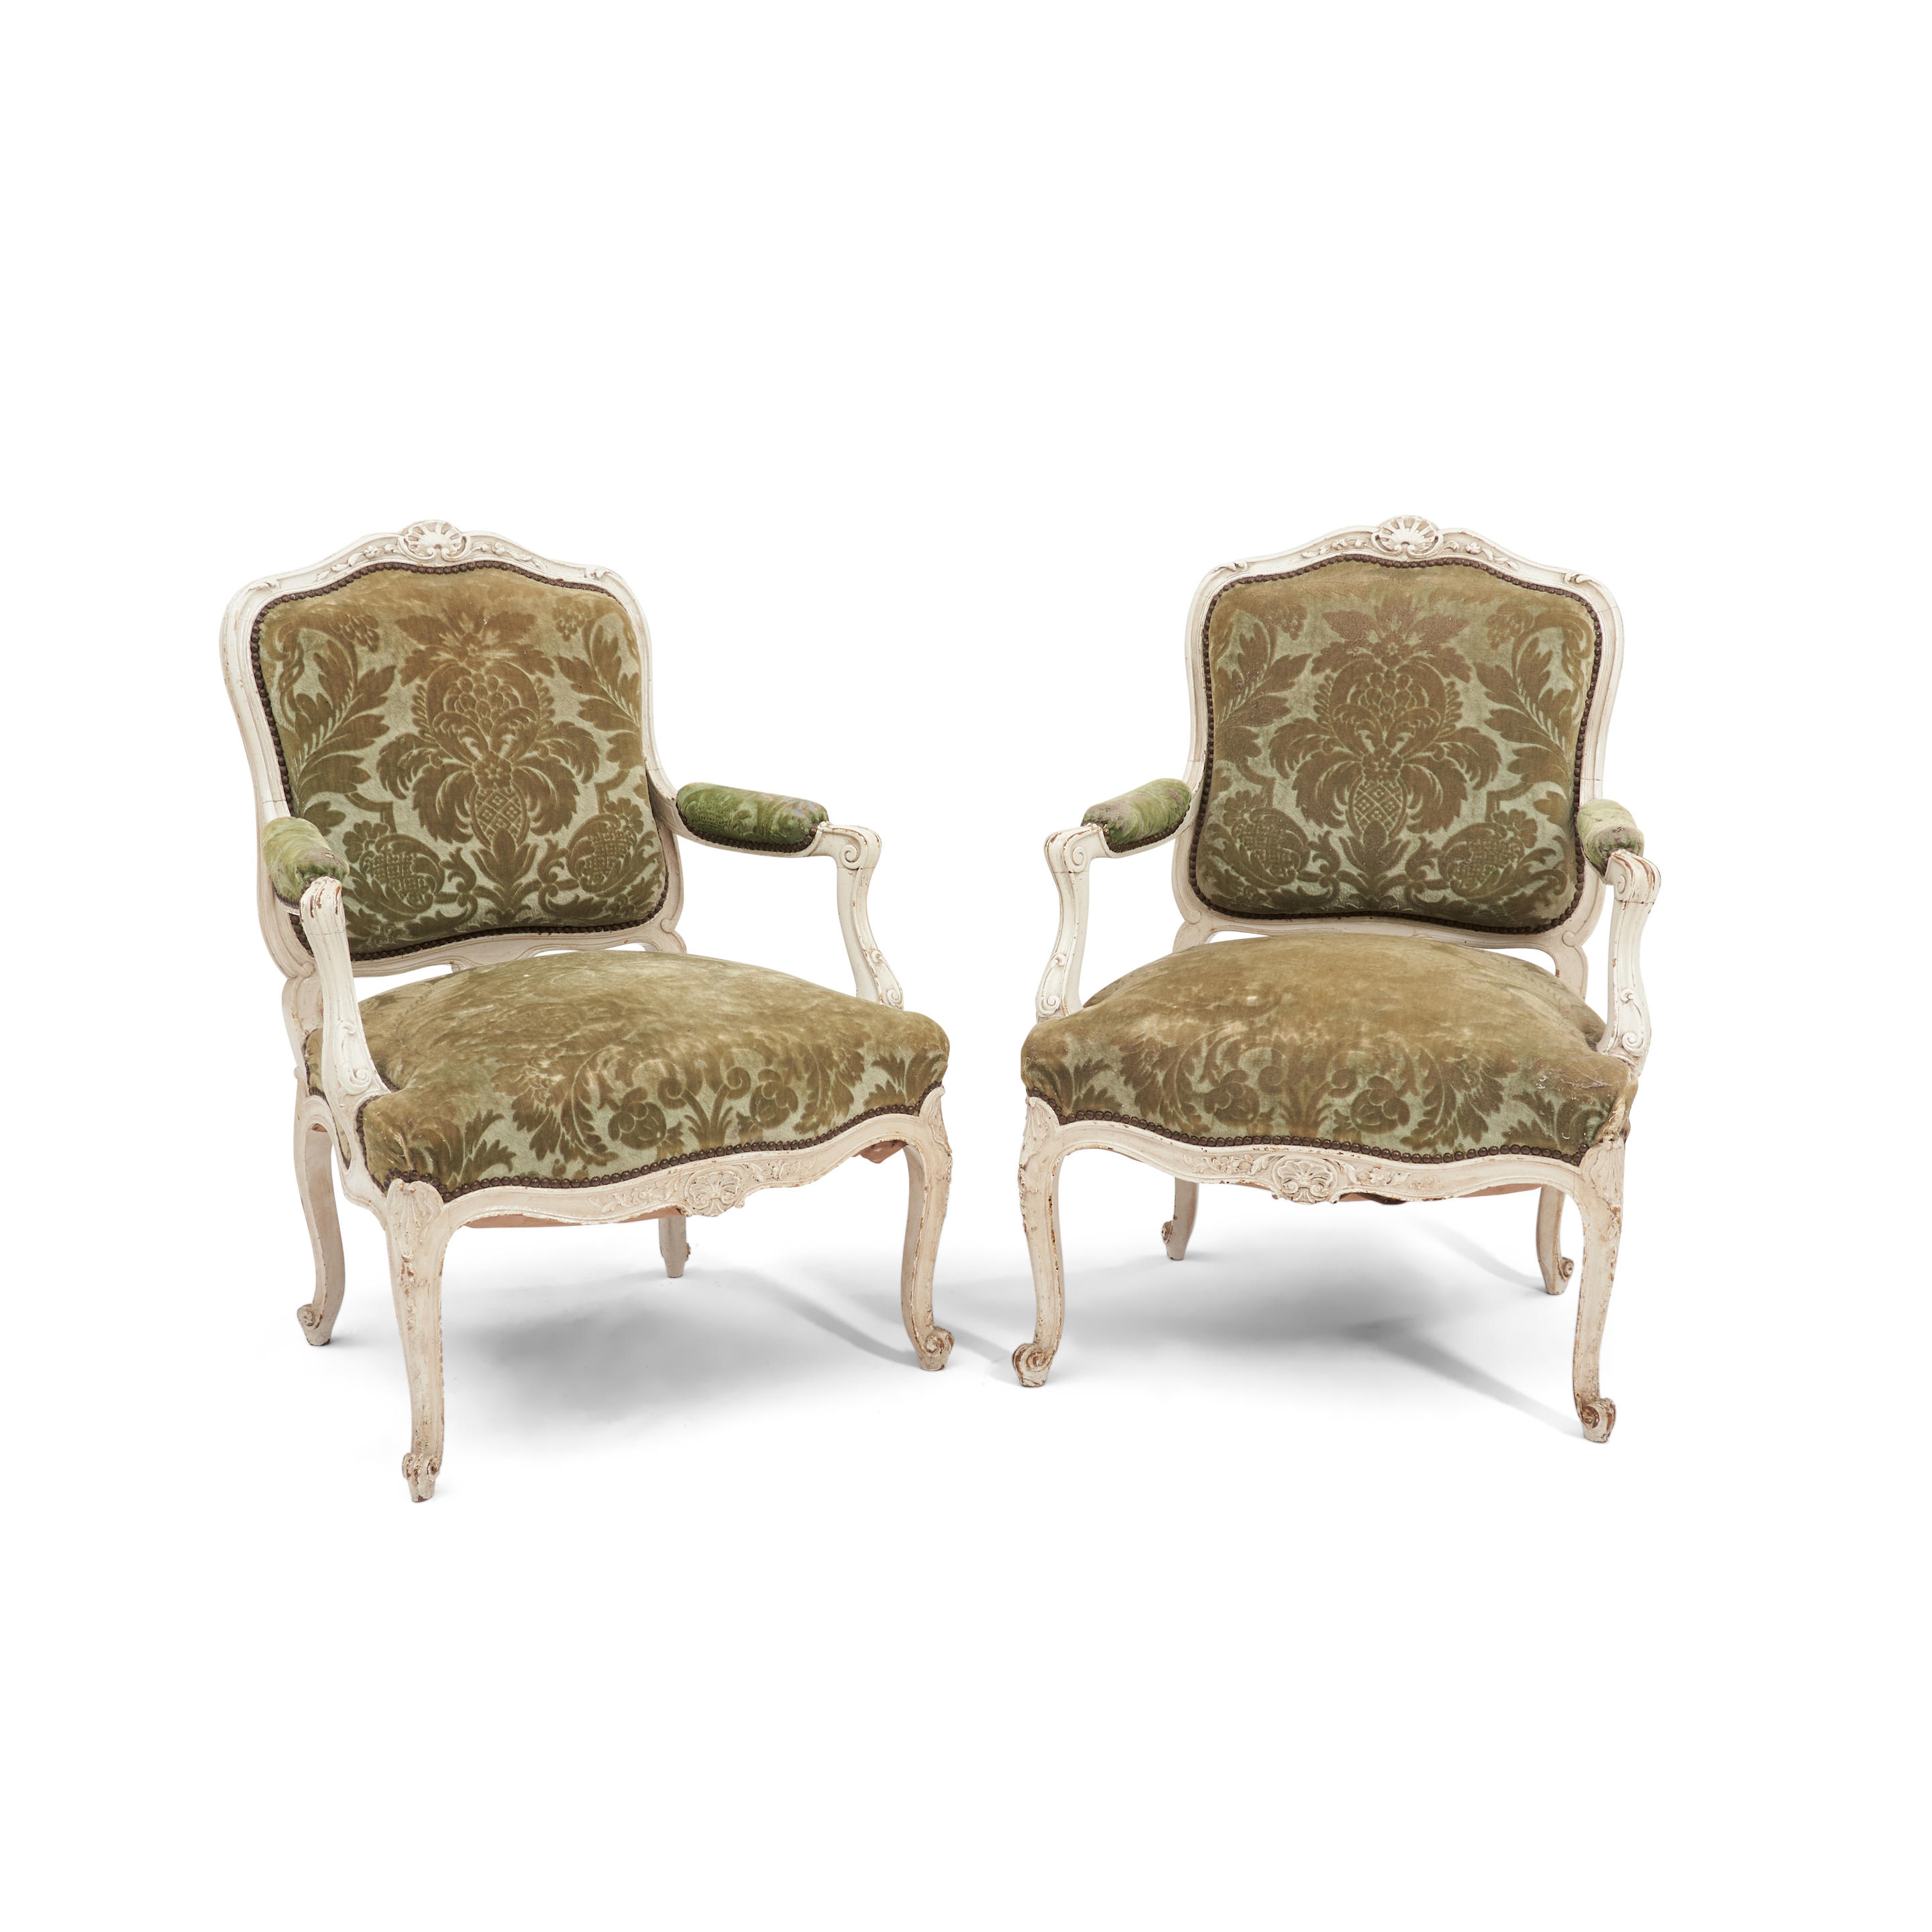 PAIR OF LOUIS XV-STYLE WHITE-PAINTED